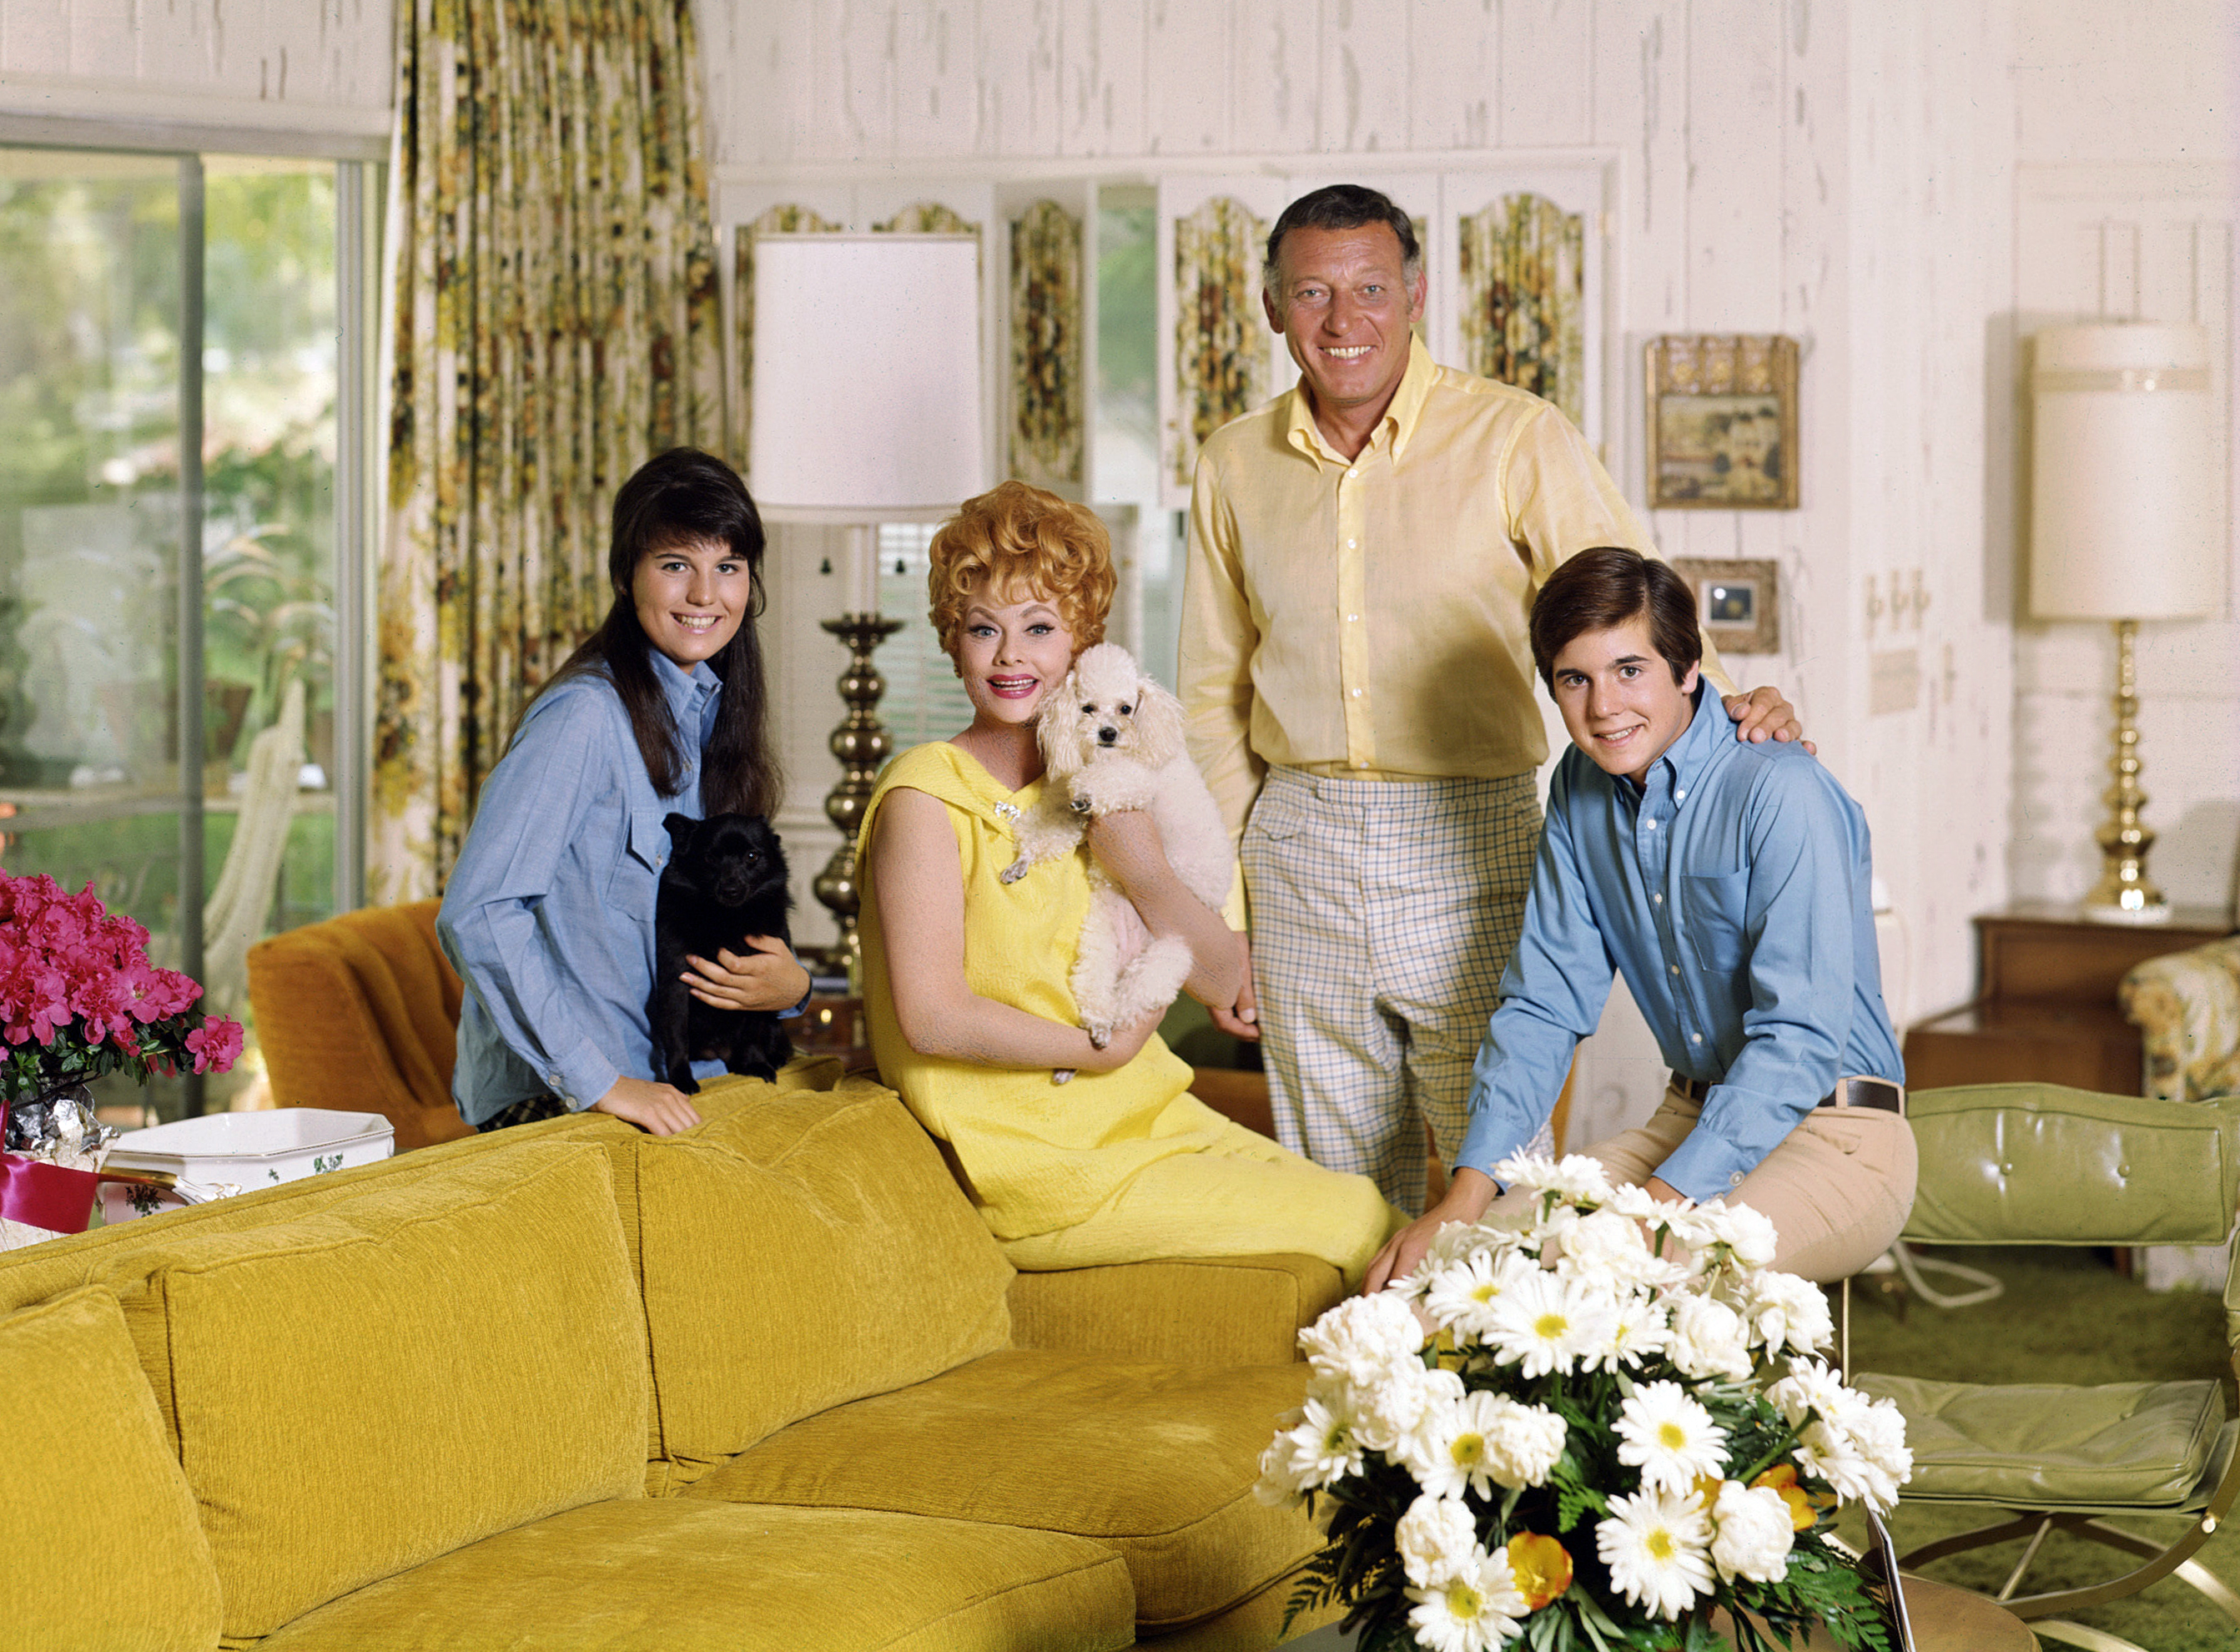 Lucie Arnaz, Lucille Ball, Gary Morton, and Desi Arnaz Jr. in "Here's Lucy" in Los Angeles, on January 1, 1962 | Source:   Getty Images